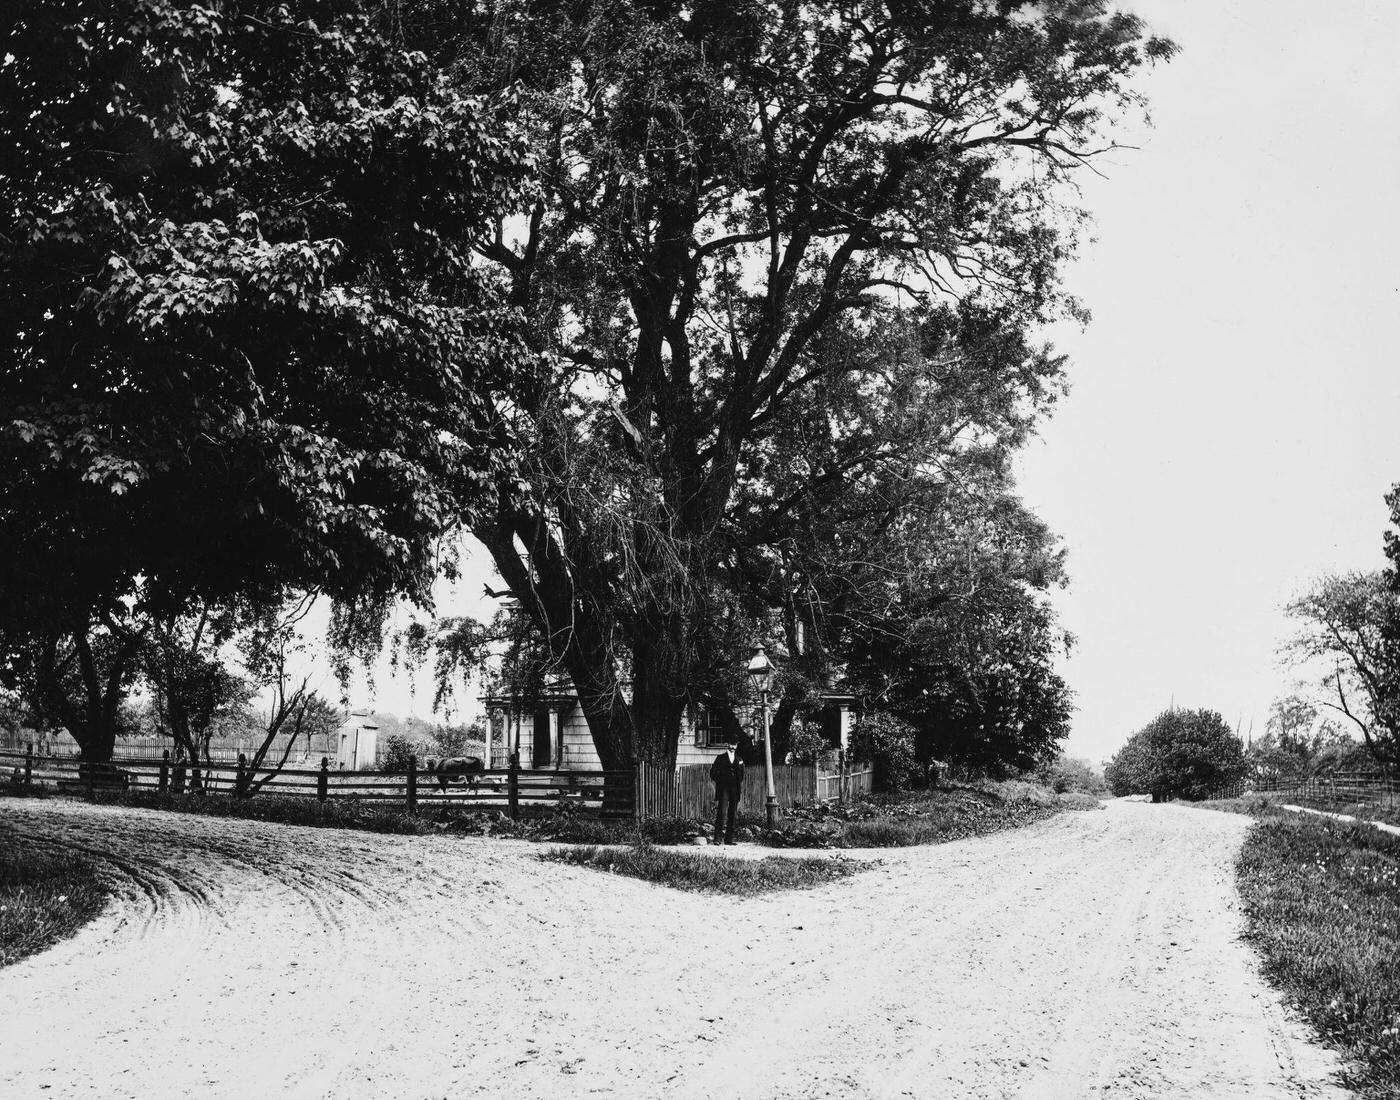 Mysterious Dirt Roads And A House, Possibly Morrell House, 1892.